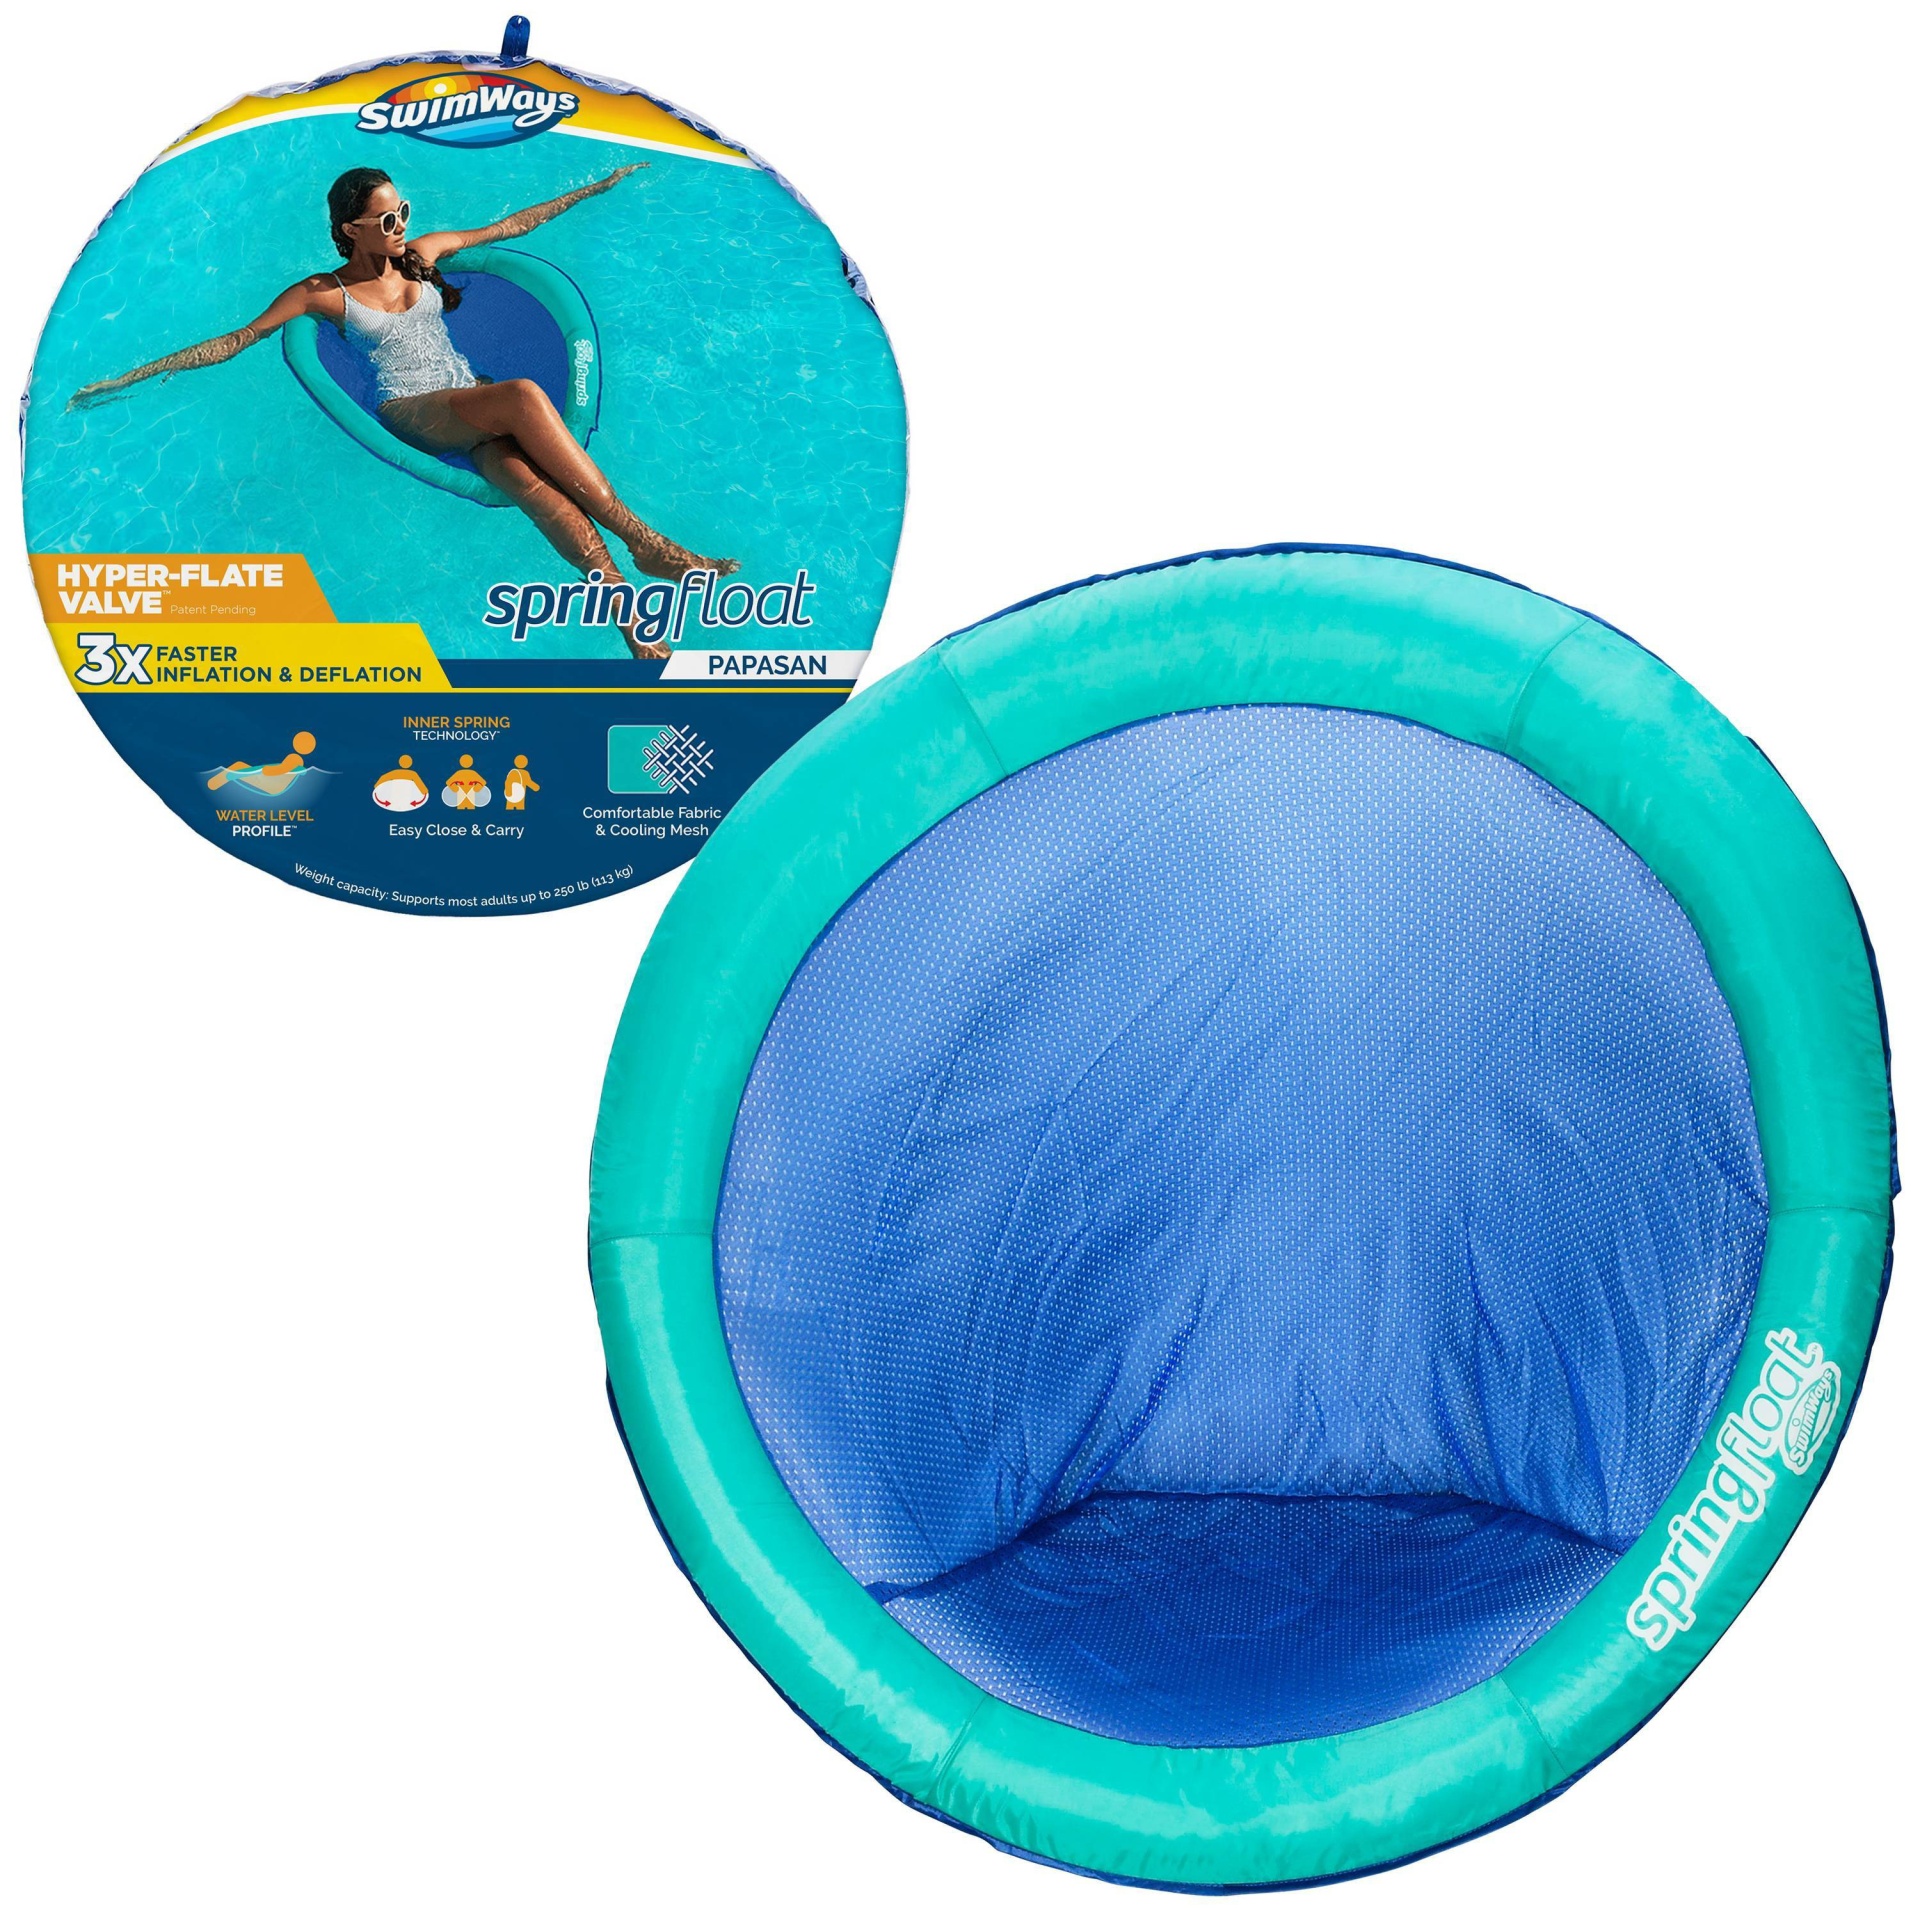 slide 1 of 11, SwimWays Spring Float Papasan Inflatable Pool Lounger with Hyper-Flate Valve - Aqua, 1 ct